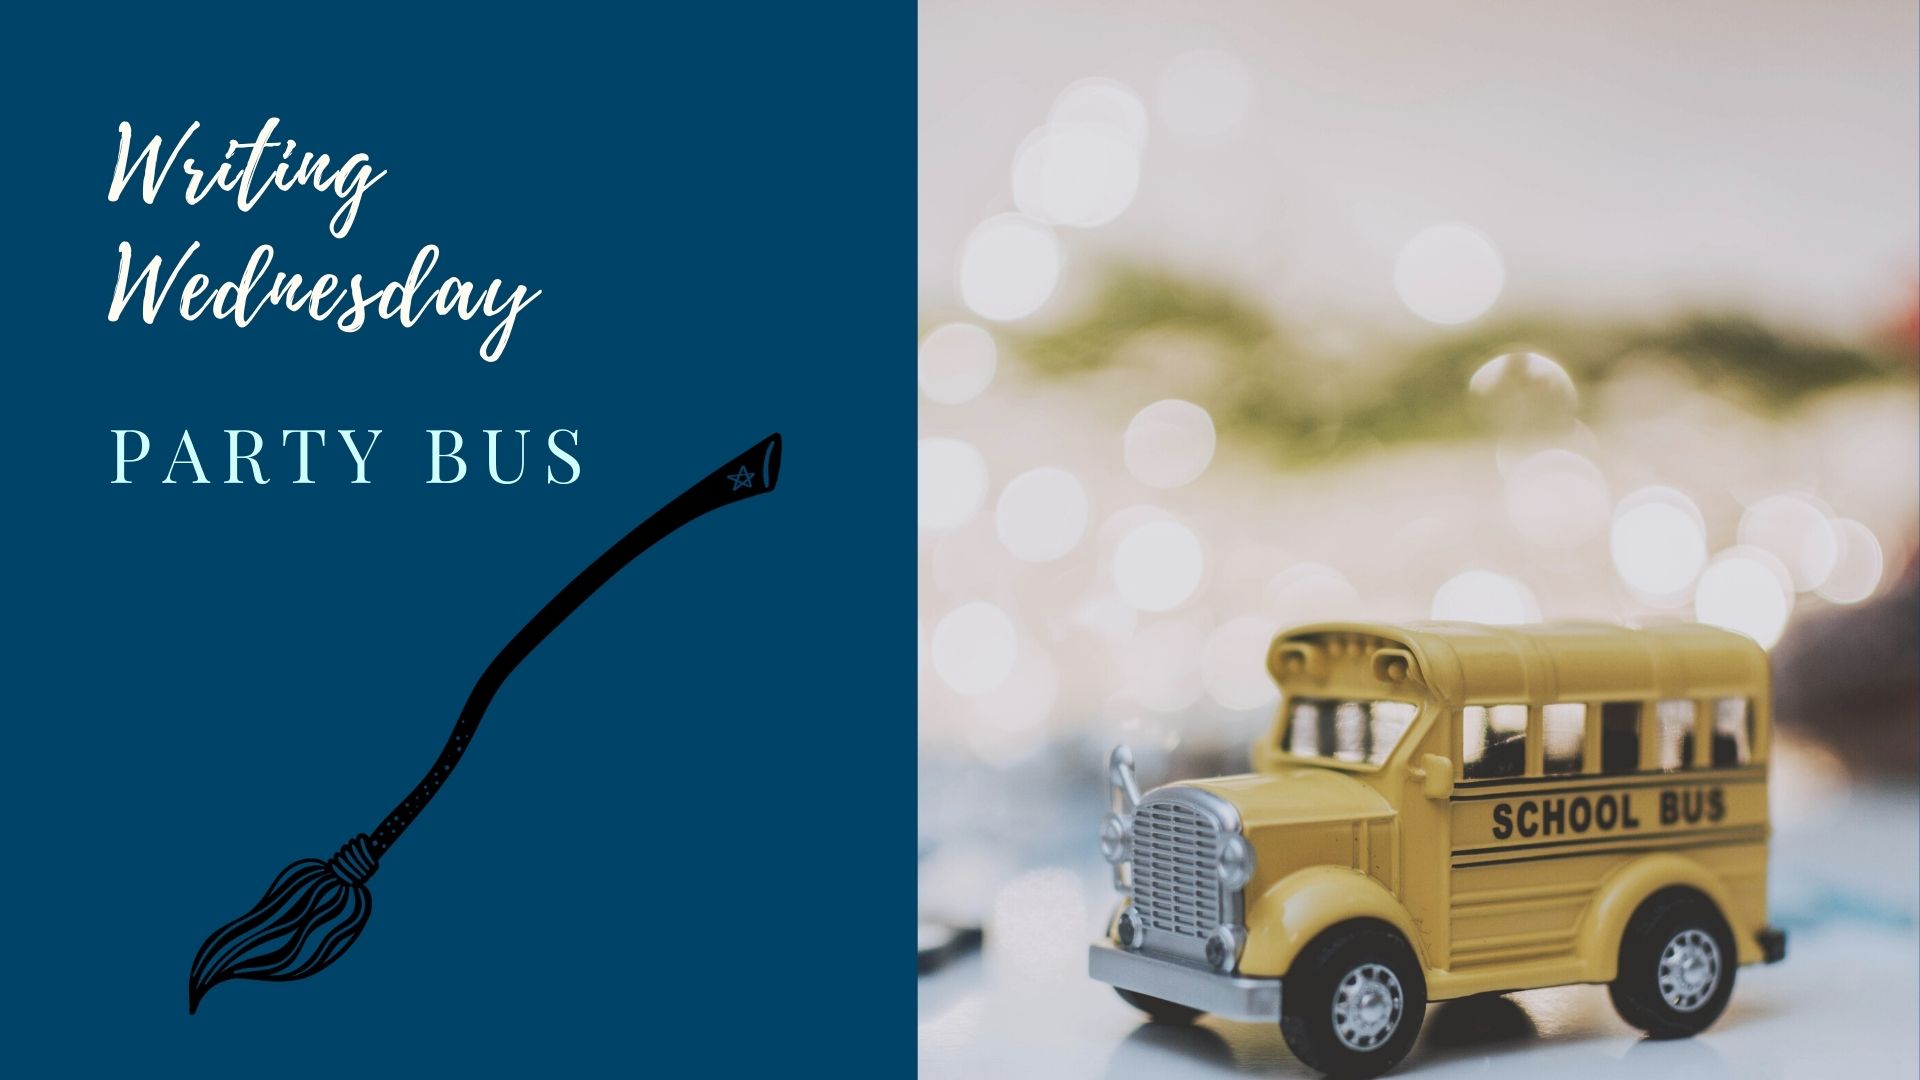 You are currently viewing Writing Wednesday: Party Bus